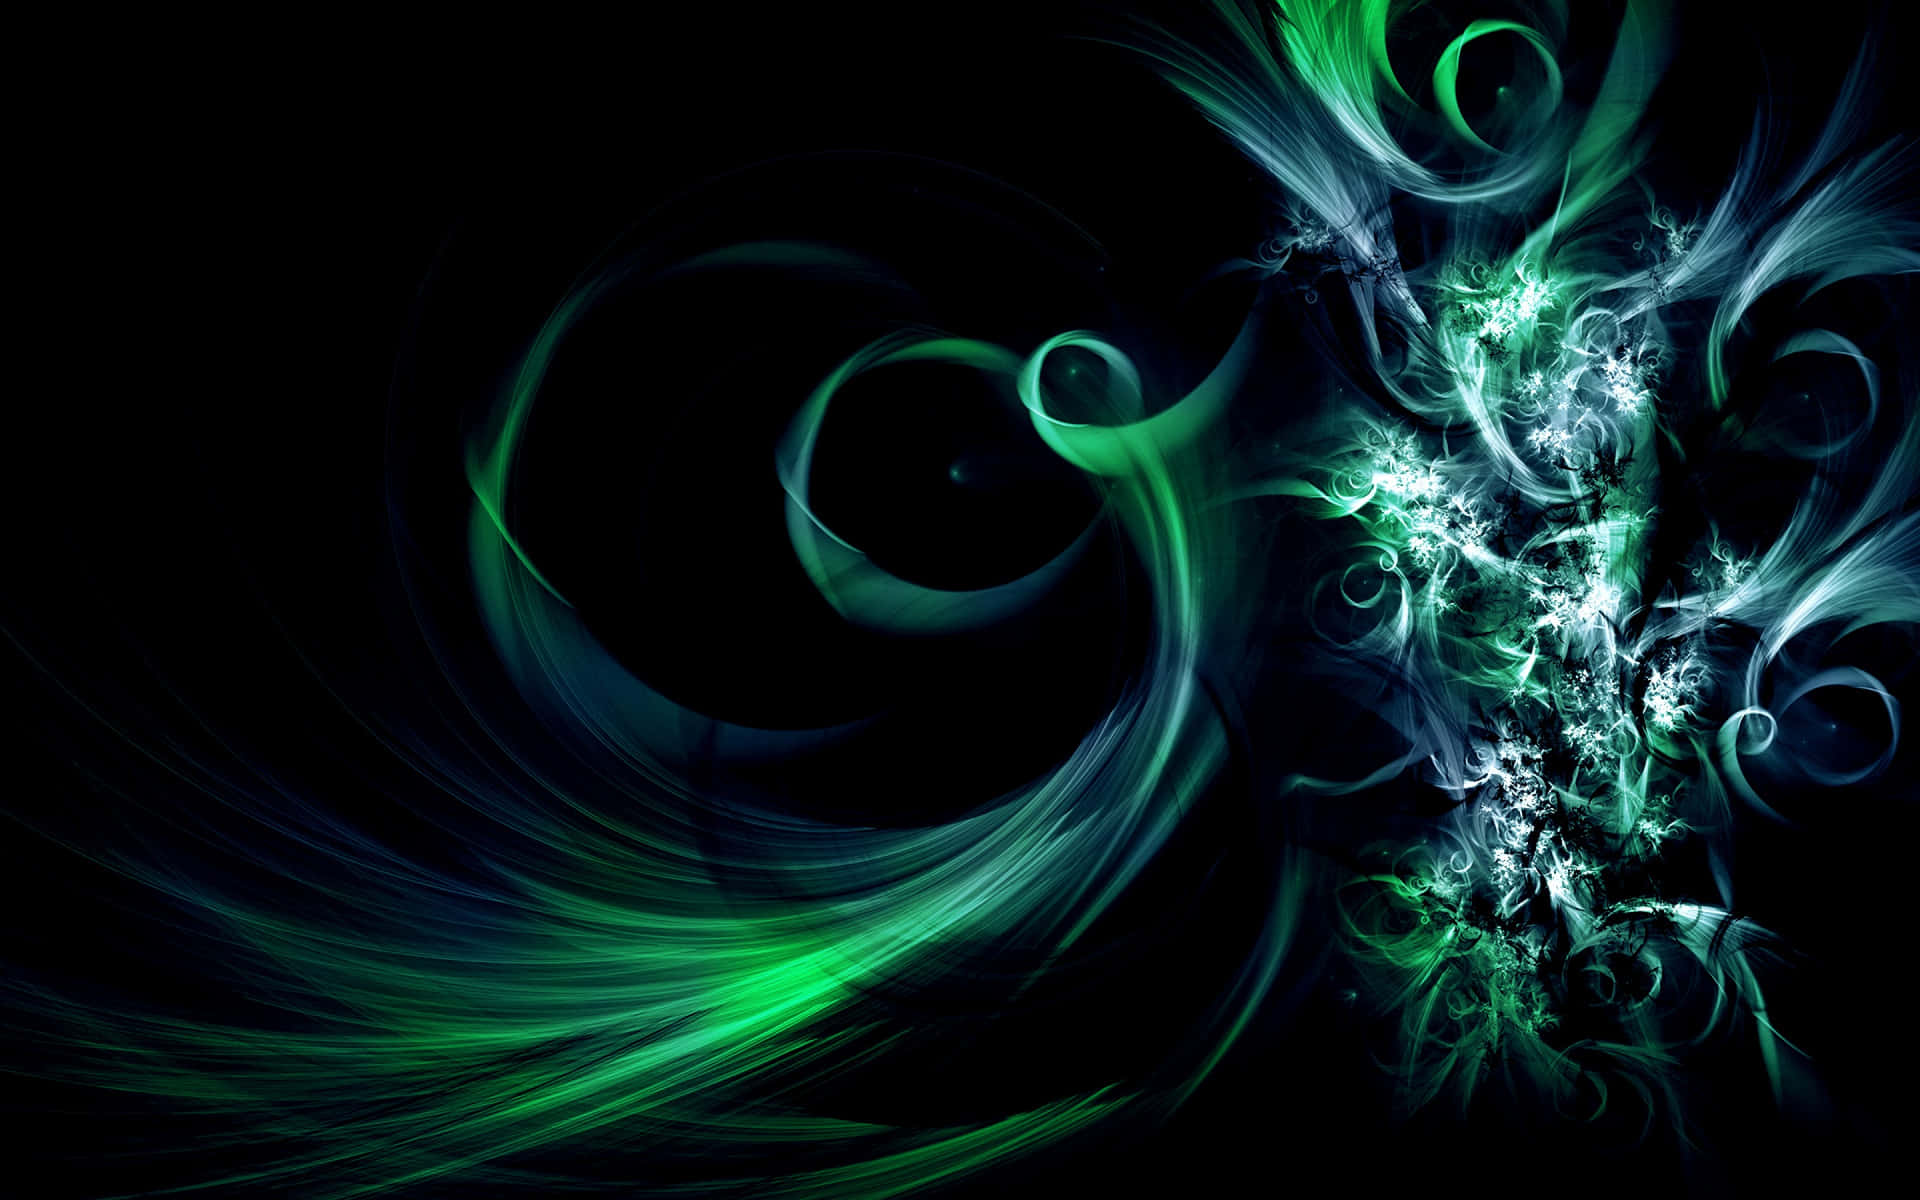 “The universe comes alive in surreal shades of green and blue in this stunning Green and Blue Galaxy” Wallpaper